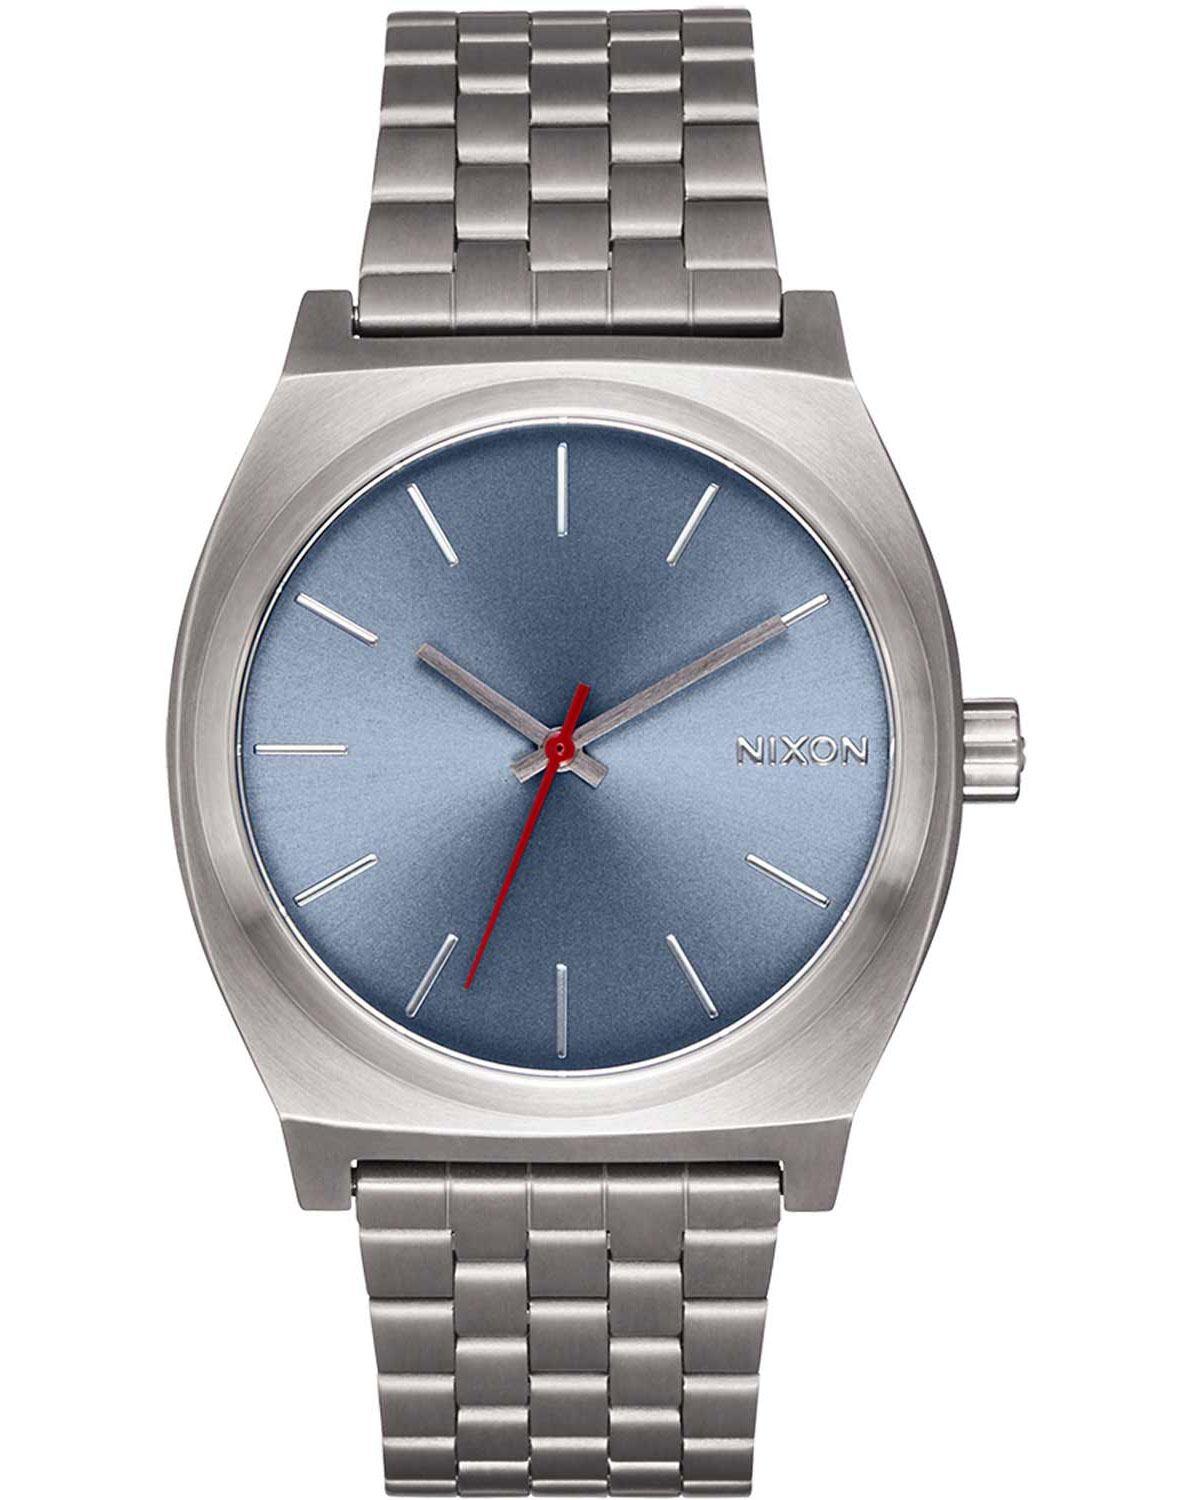 nixon time teller a045 5160 00 silver case with stainless steel bracelet image1